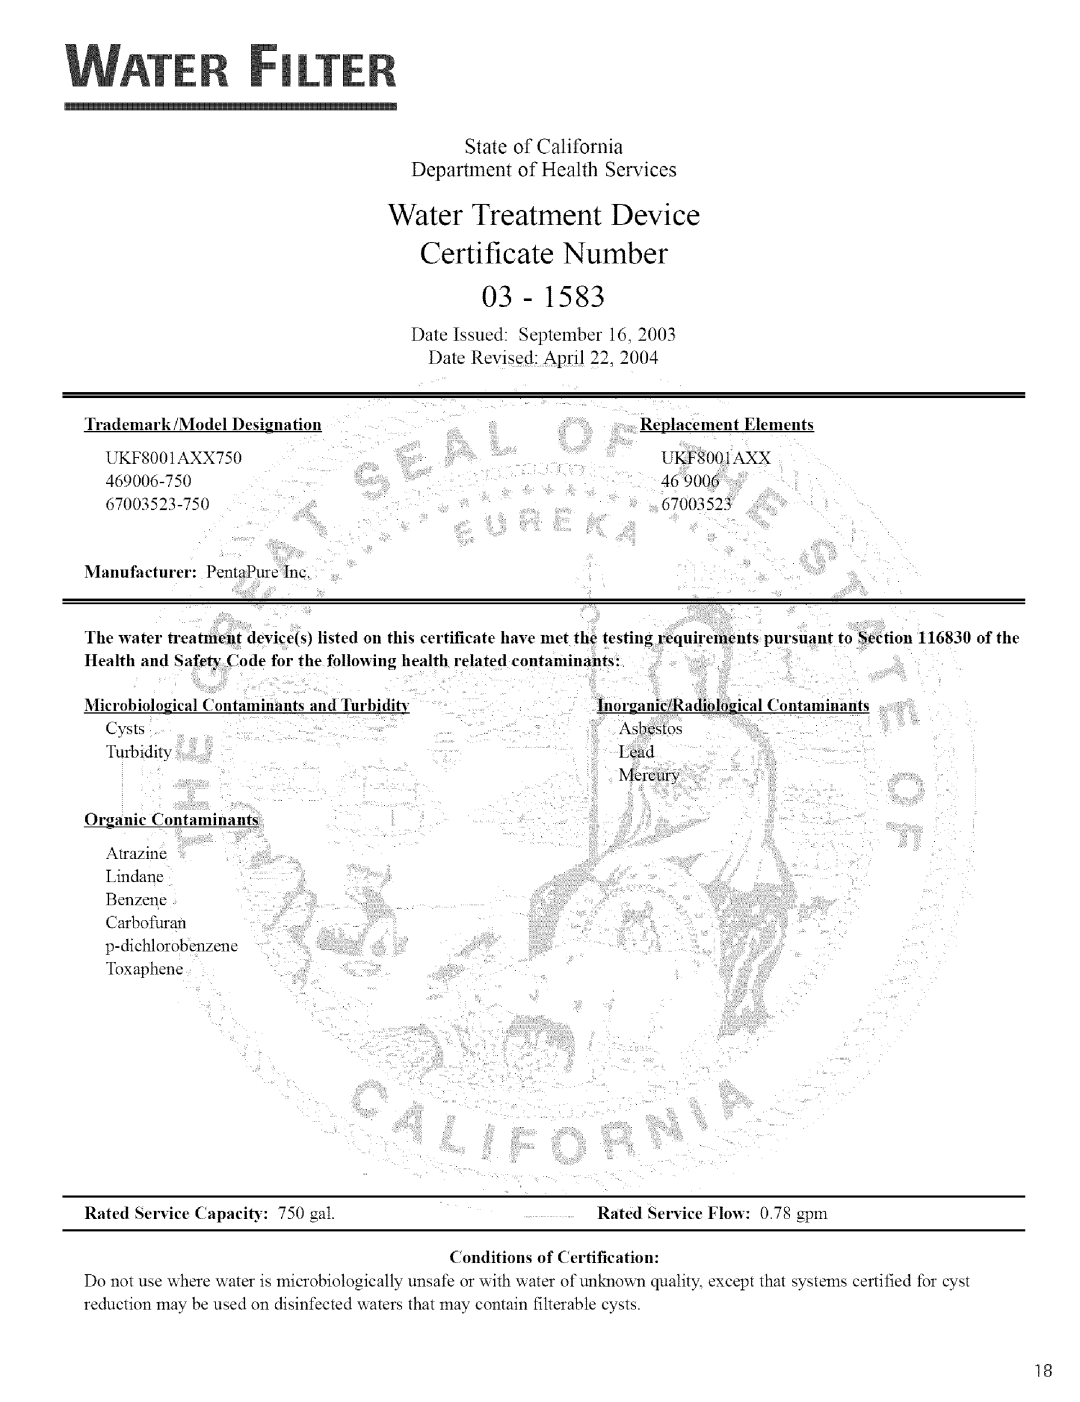 Jenn-Air Refrigerator 1583, Water Treatment Device, Certificate, Number, State of California Department of Health Services 